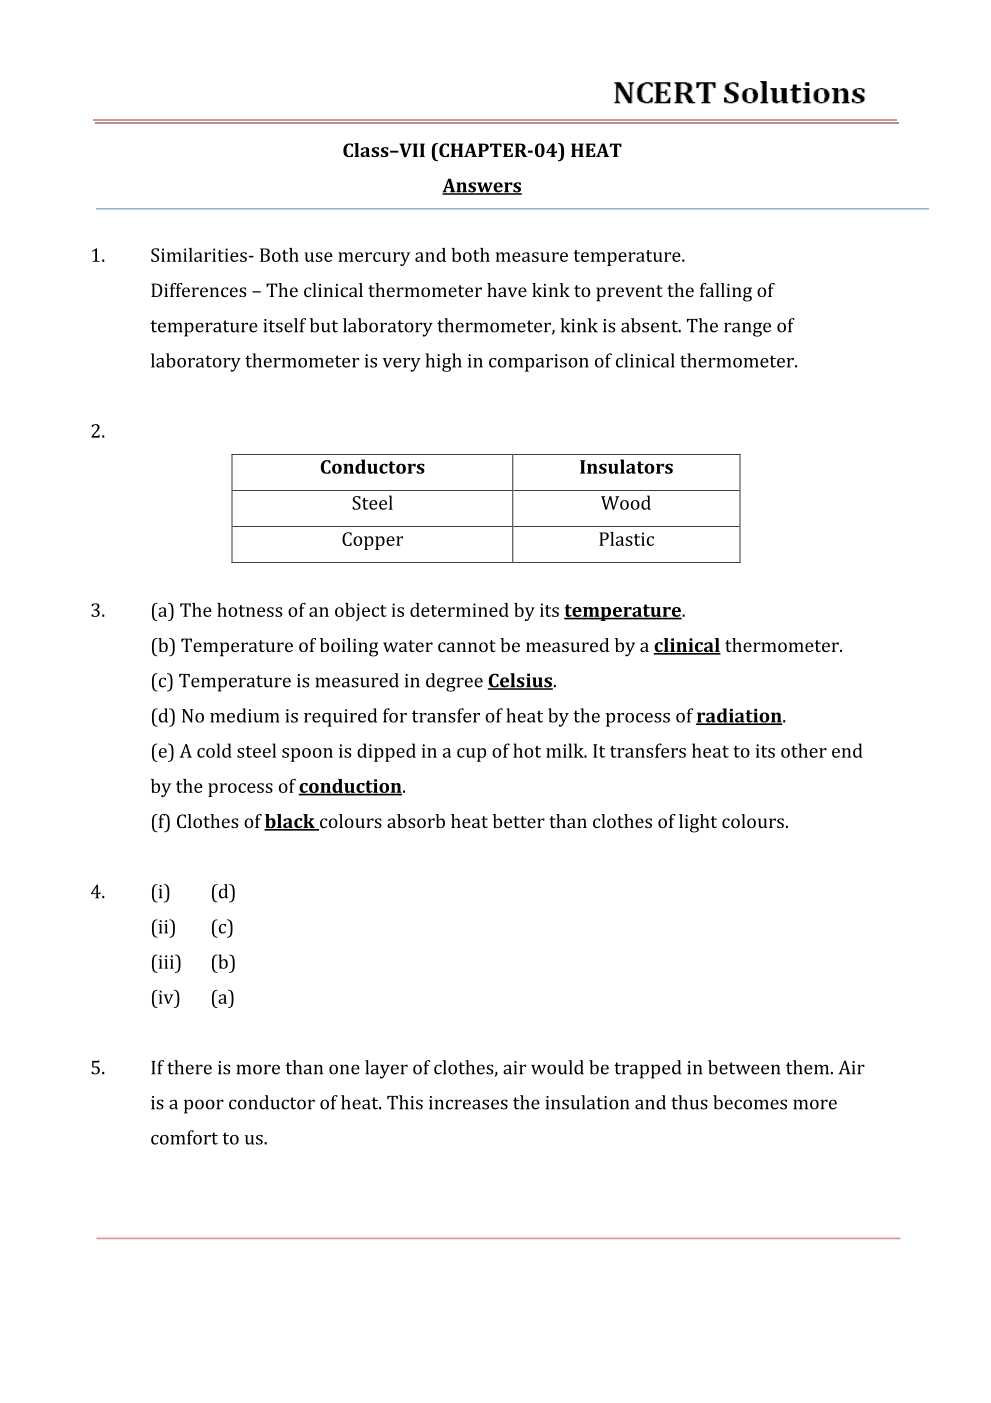 NCERT Solutions For Class 7 science Chapter 4 Heat